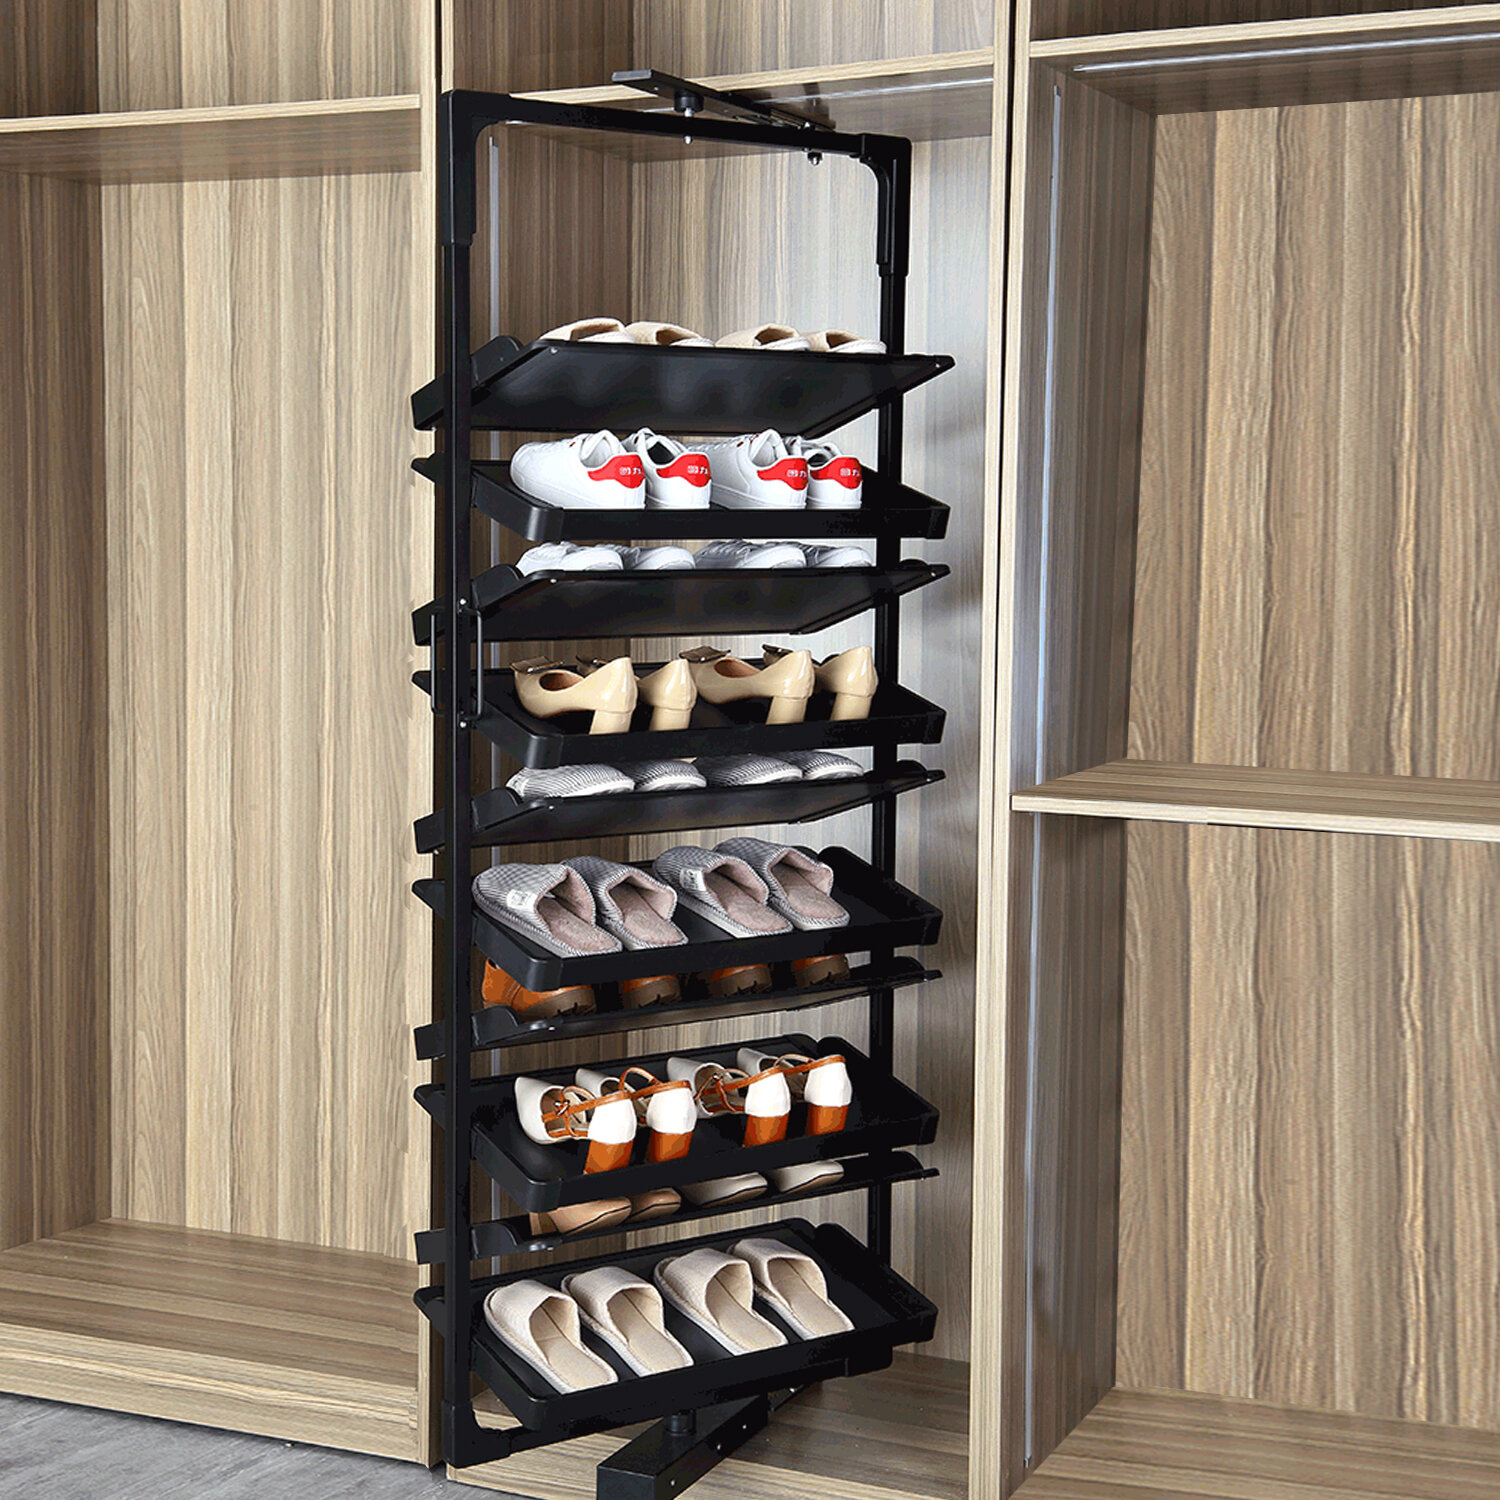 Shoe Storage Solutions Revolving Shoe Stand 3 Tier Fits up to 18 Pairs New Range 